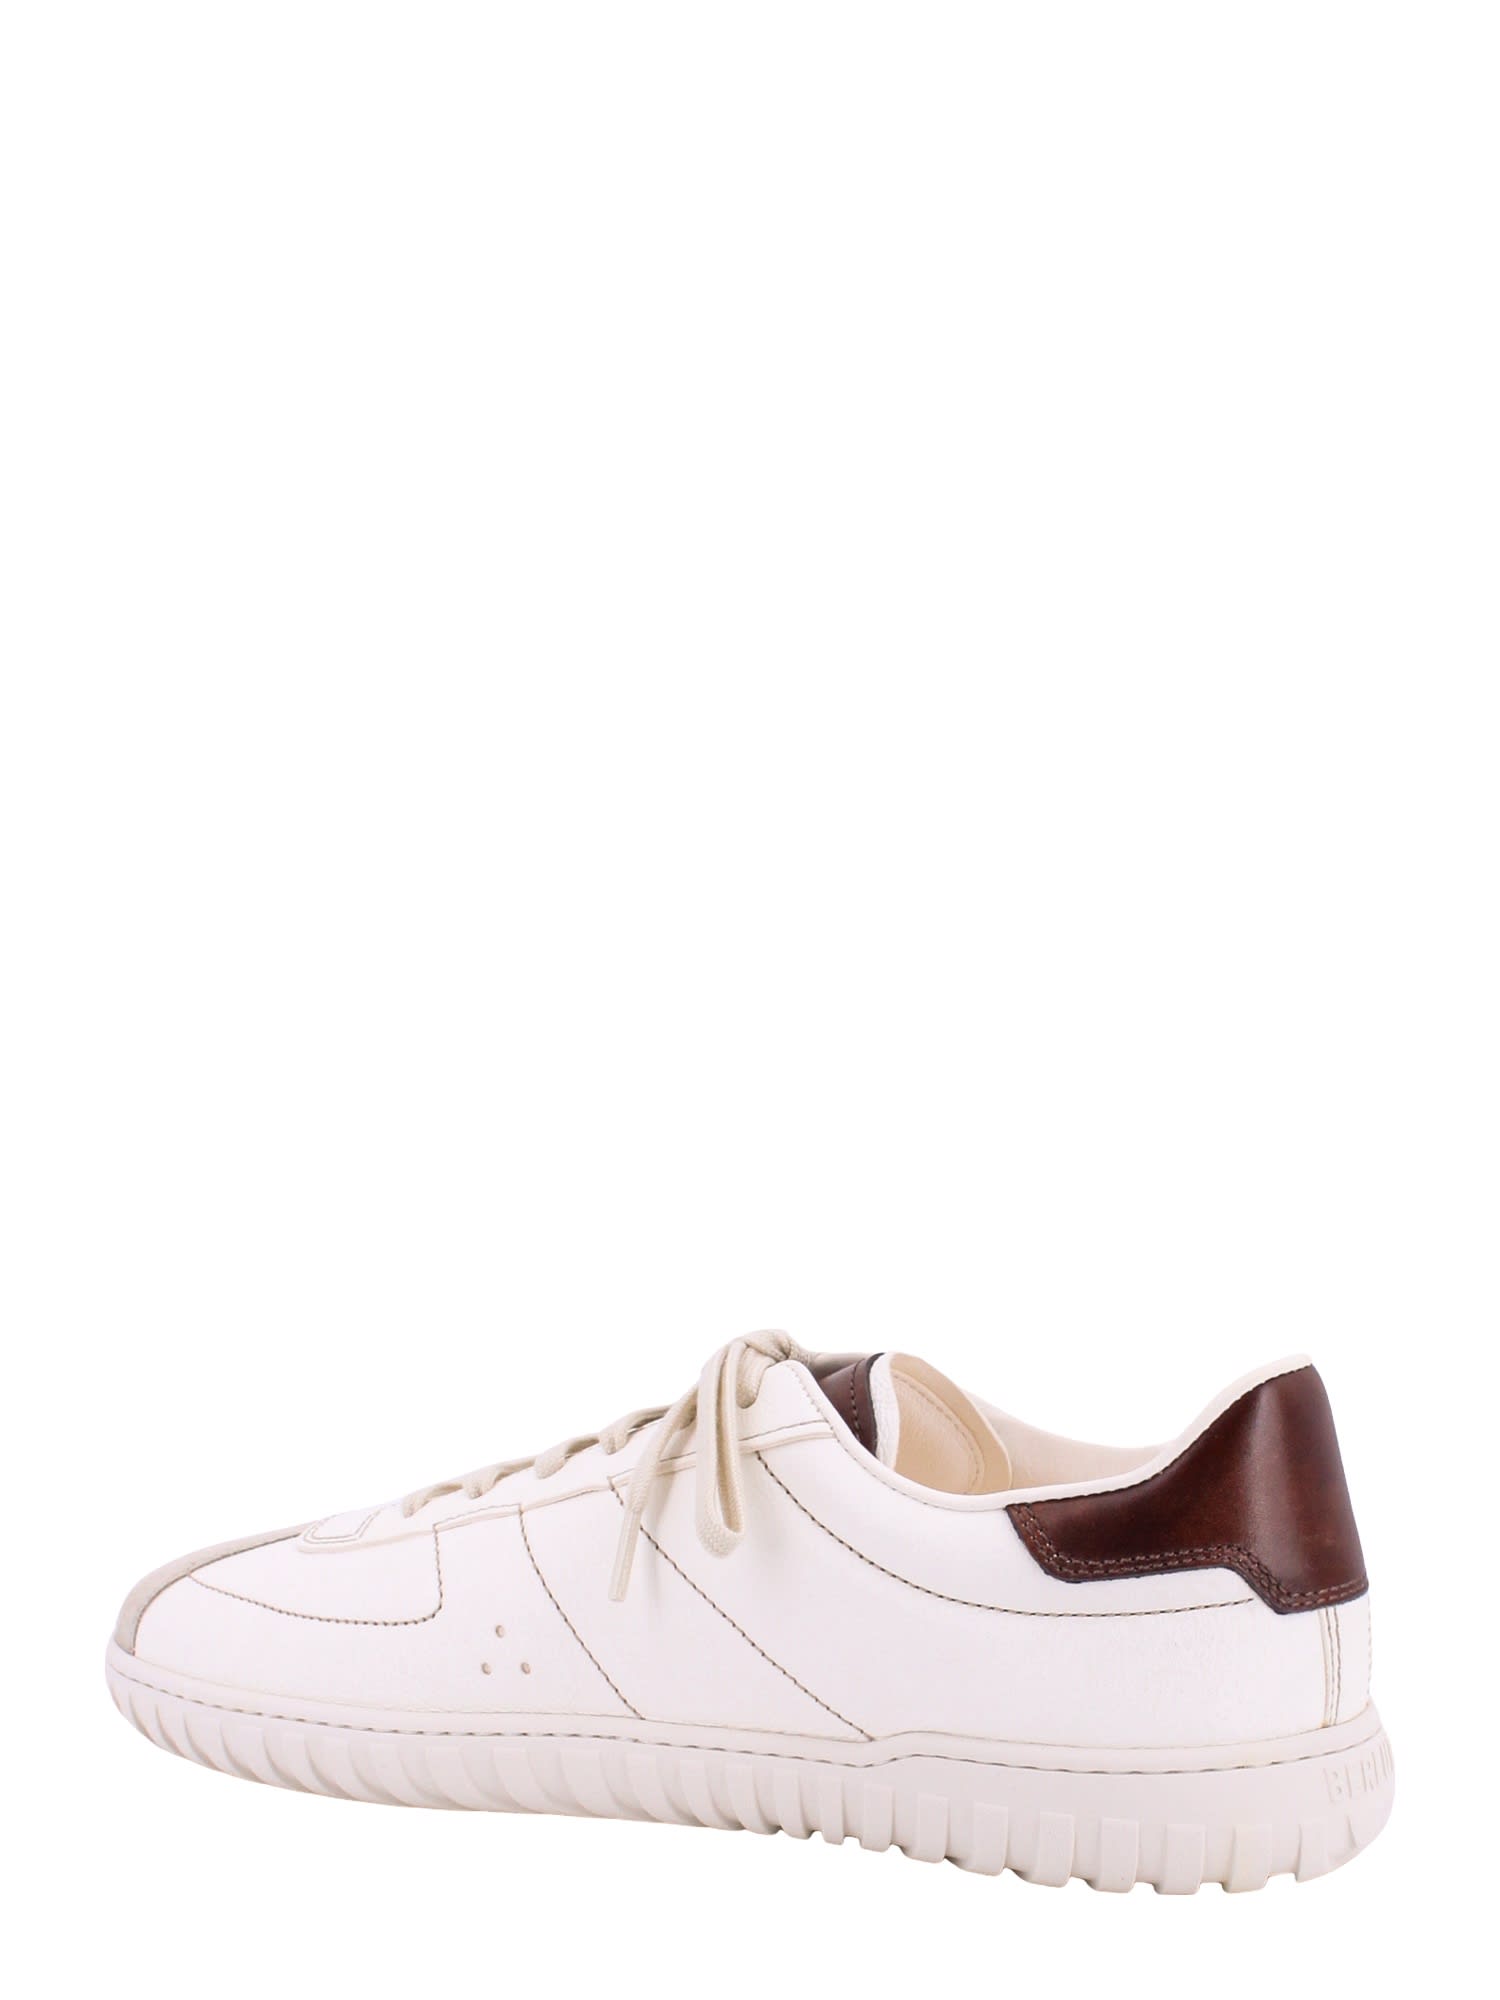 Berluti Signature Graphic Leather Sneakers Trainers Shoes Trainers